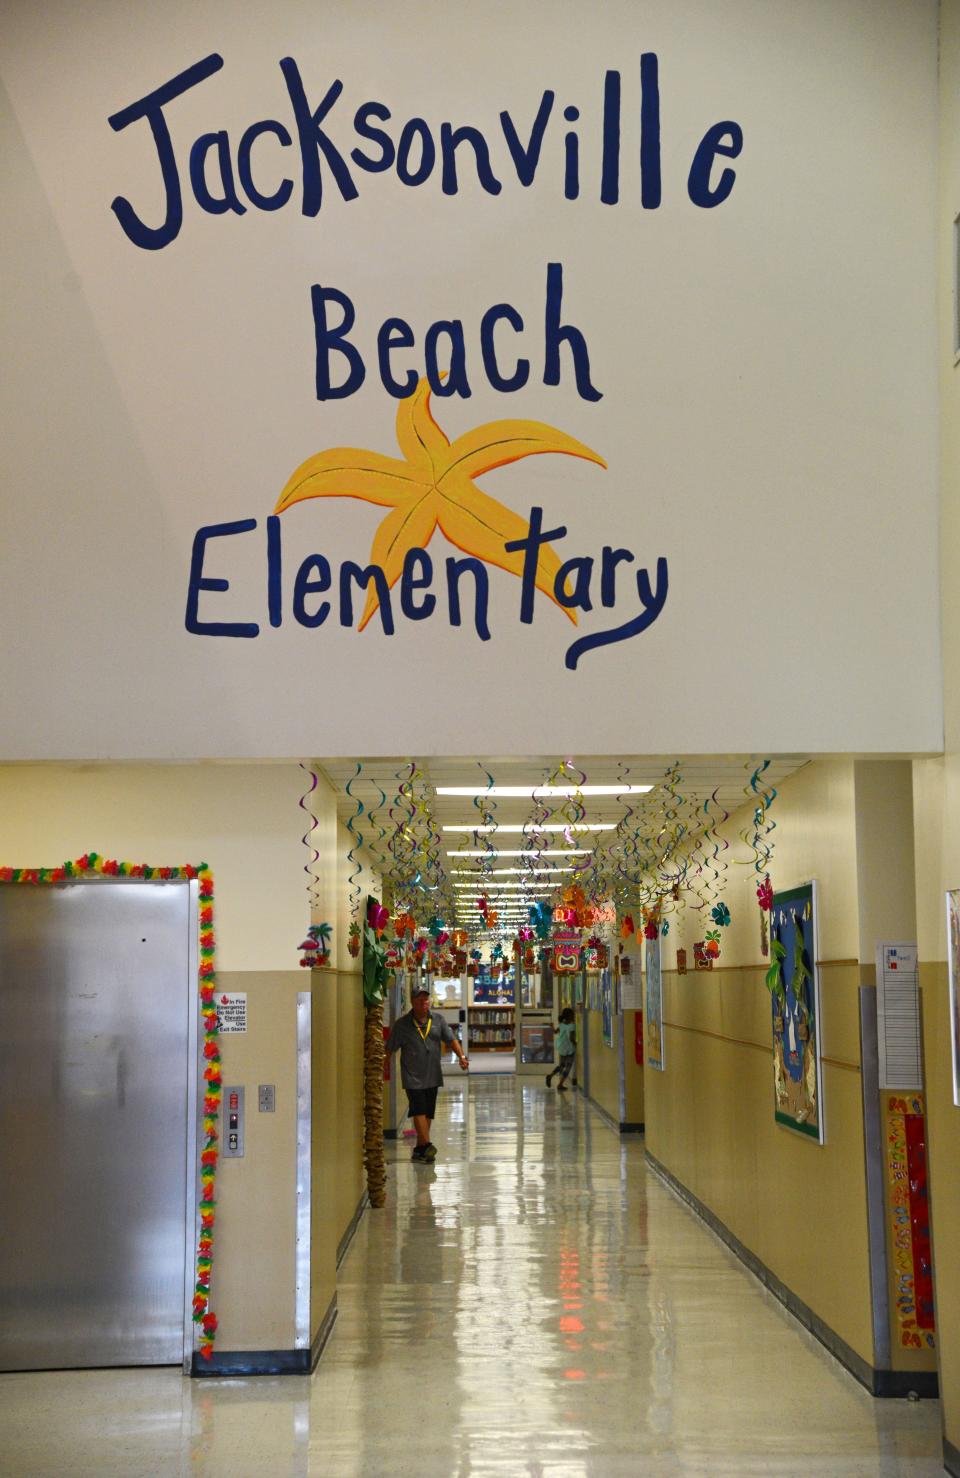 Bob.Mack@jacksonville.com - 9/4/15 - The central hallway of the first floor of the school. Jacksonville Beach Elementary School in Jacksonville Beach, FL is a dedicated Magnet School for gifted and academically talented students. (The Florida Times-Union, Bob Mack)